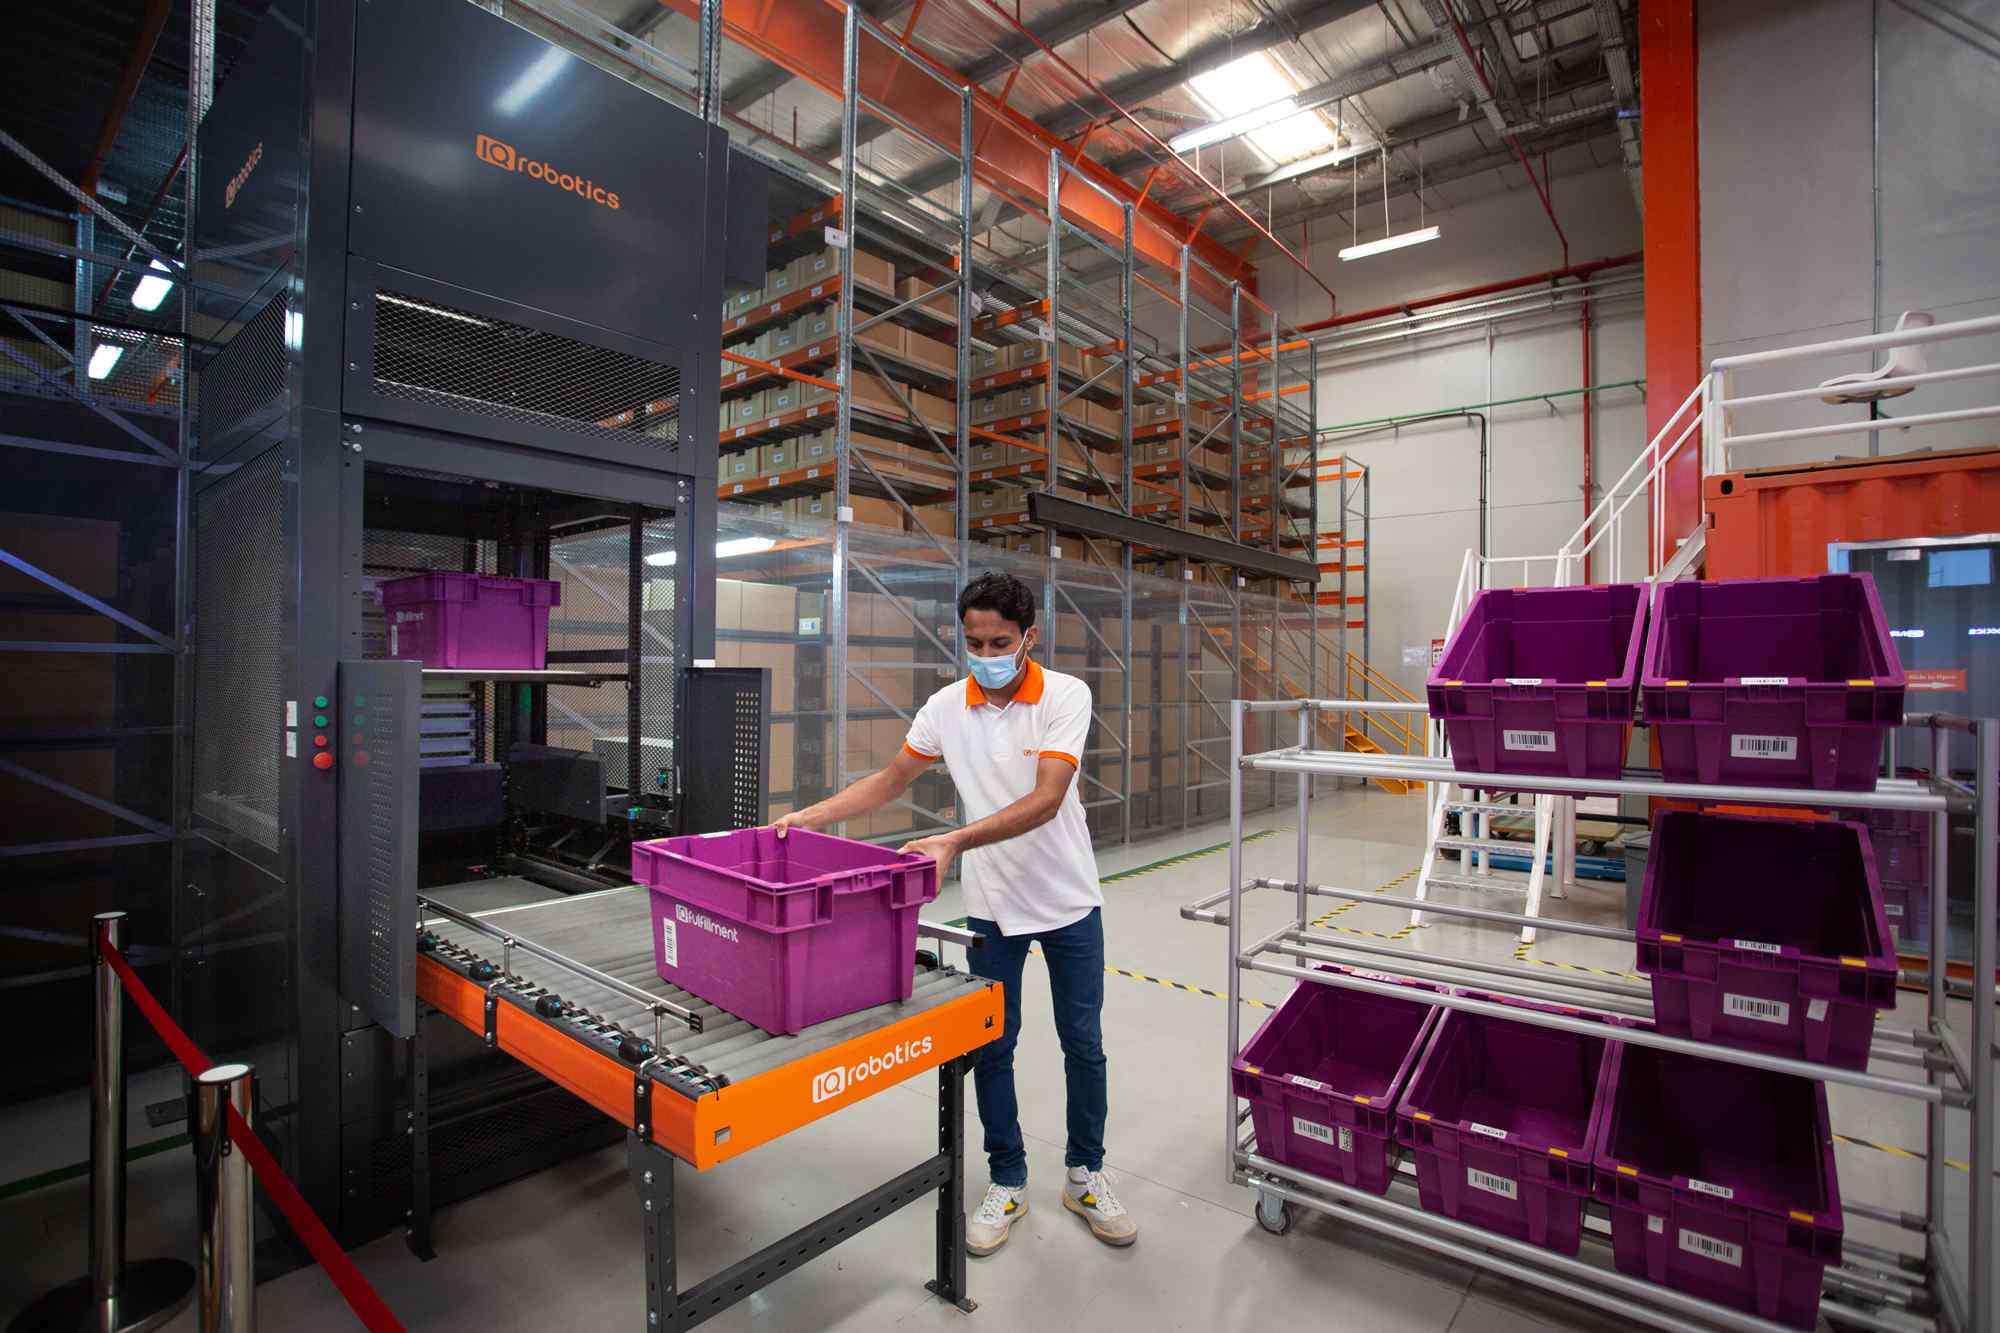 A Look Inside the Middle East’s First Robotic Warehouse